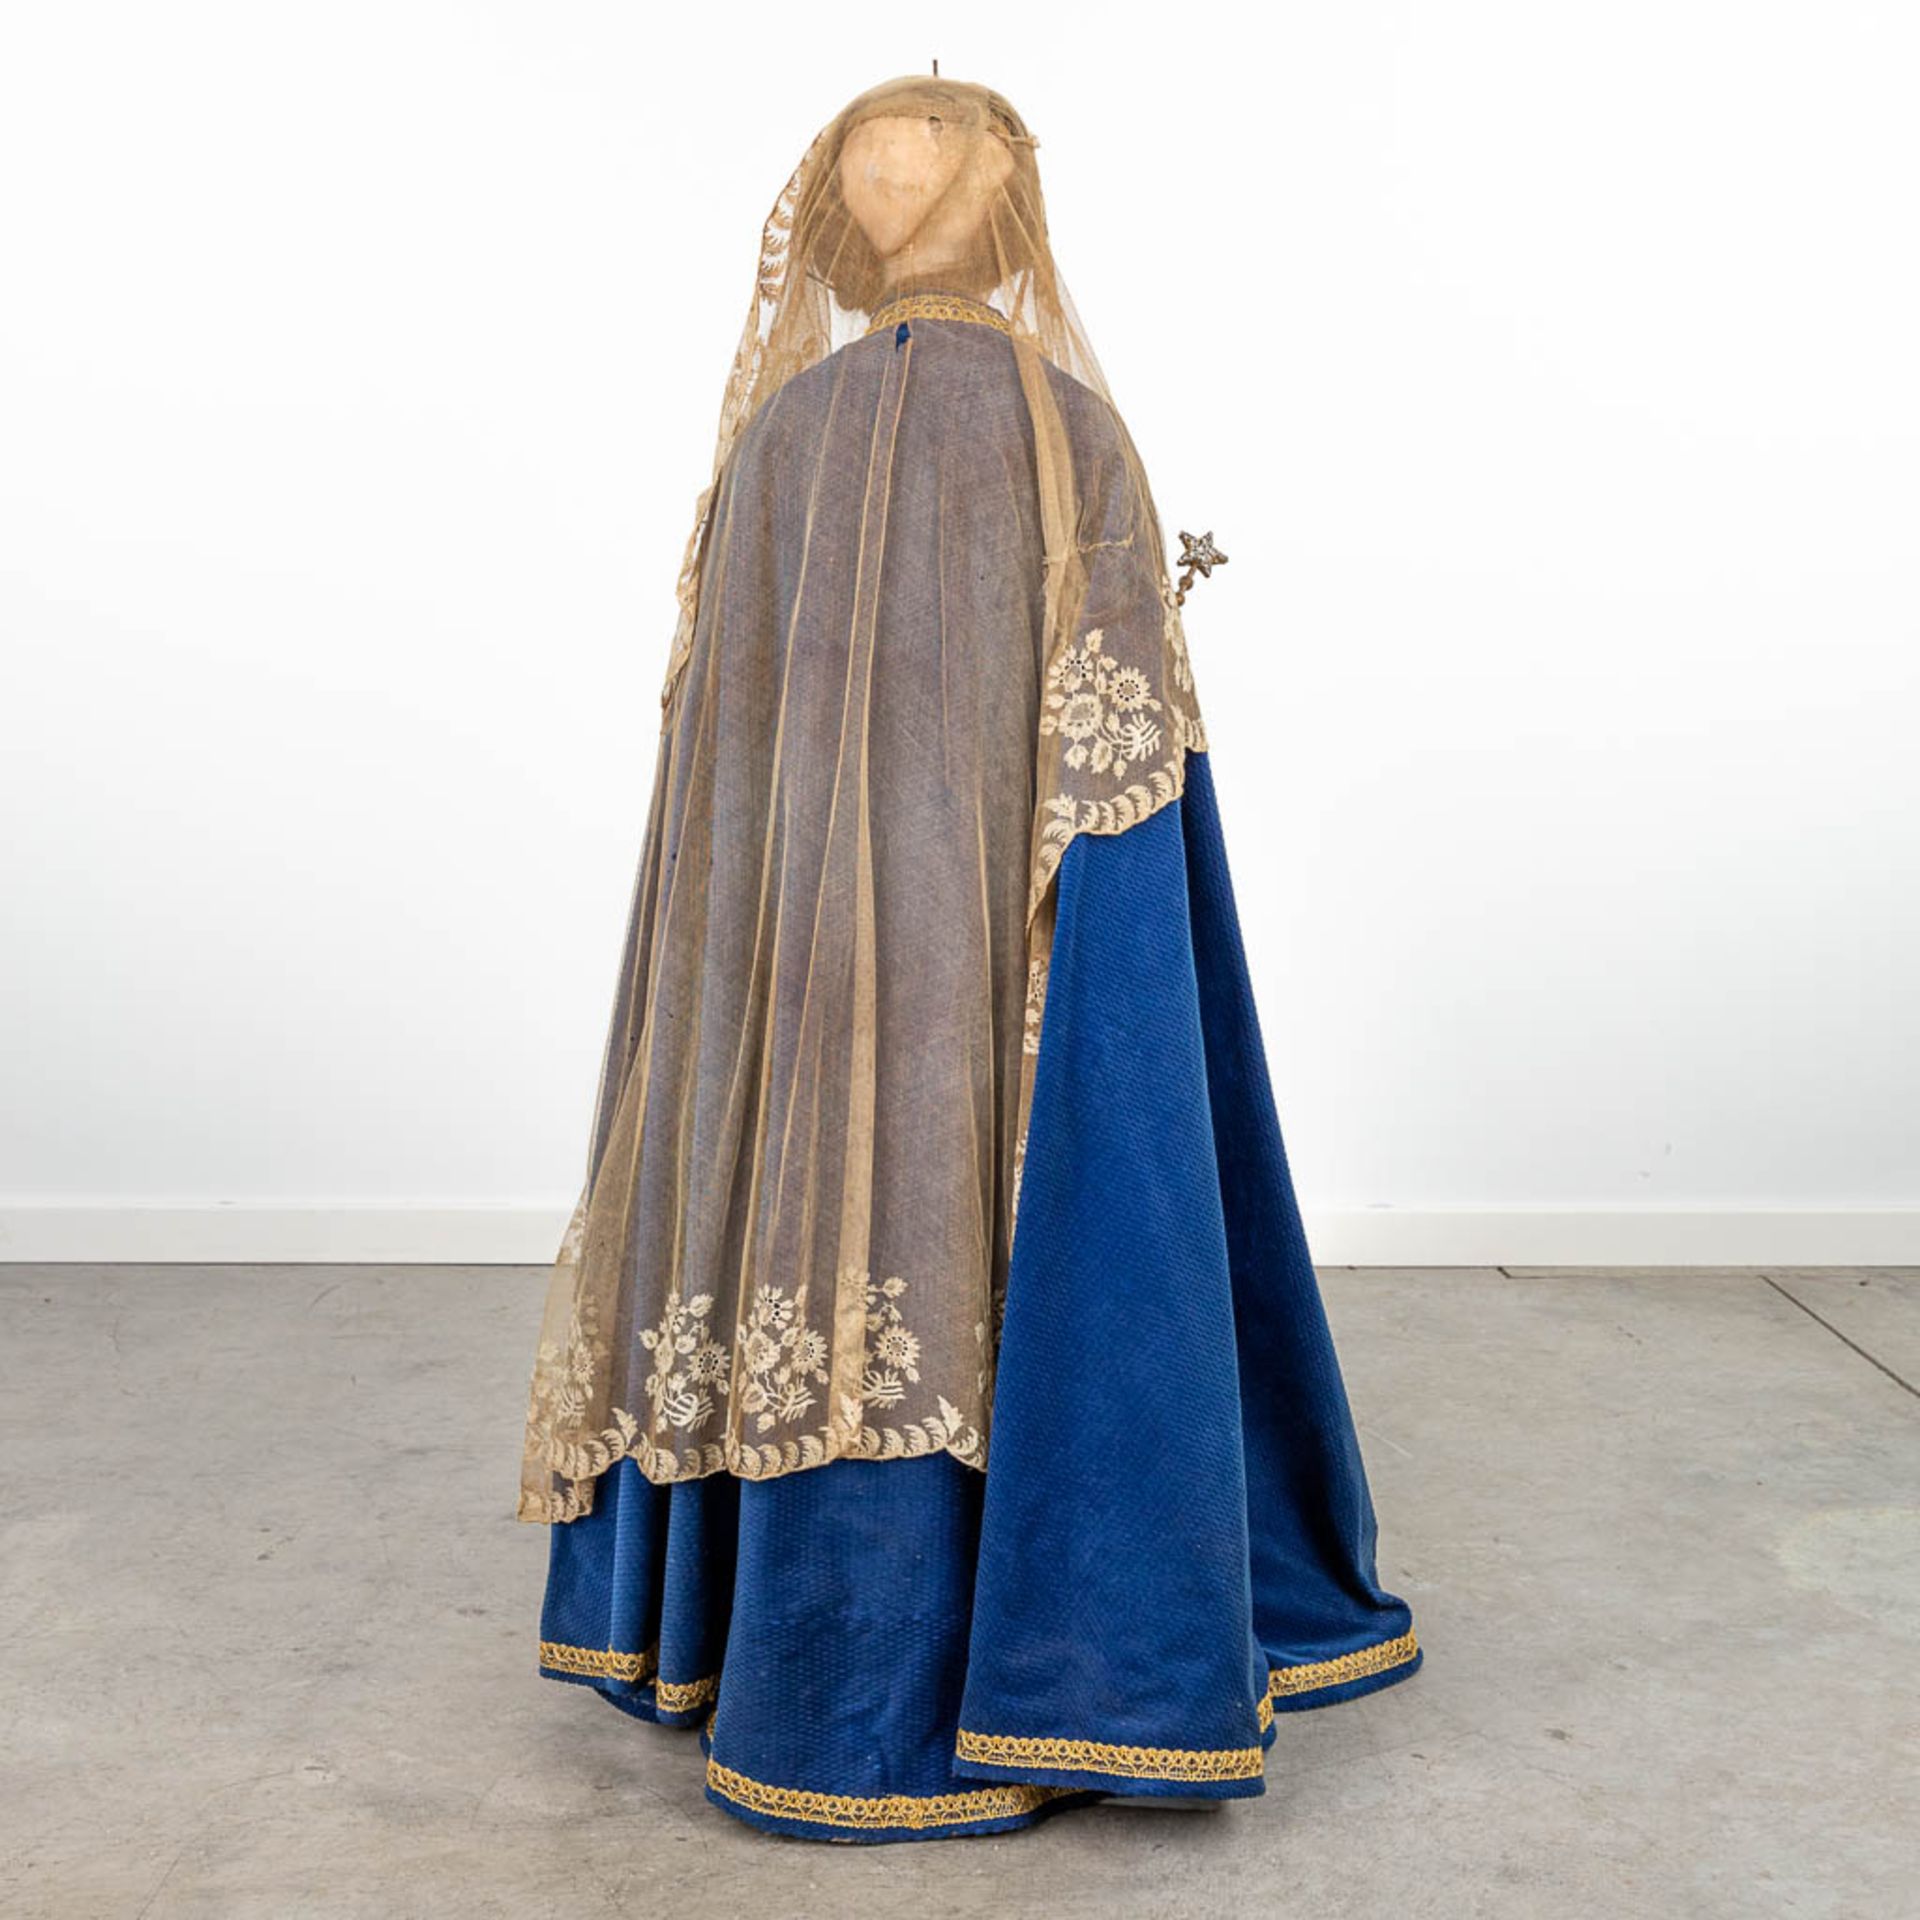 A procession madonna with robes, real hair and made of sculptured wood. 19th century. - Image 9 of 13